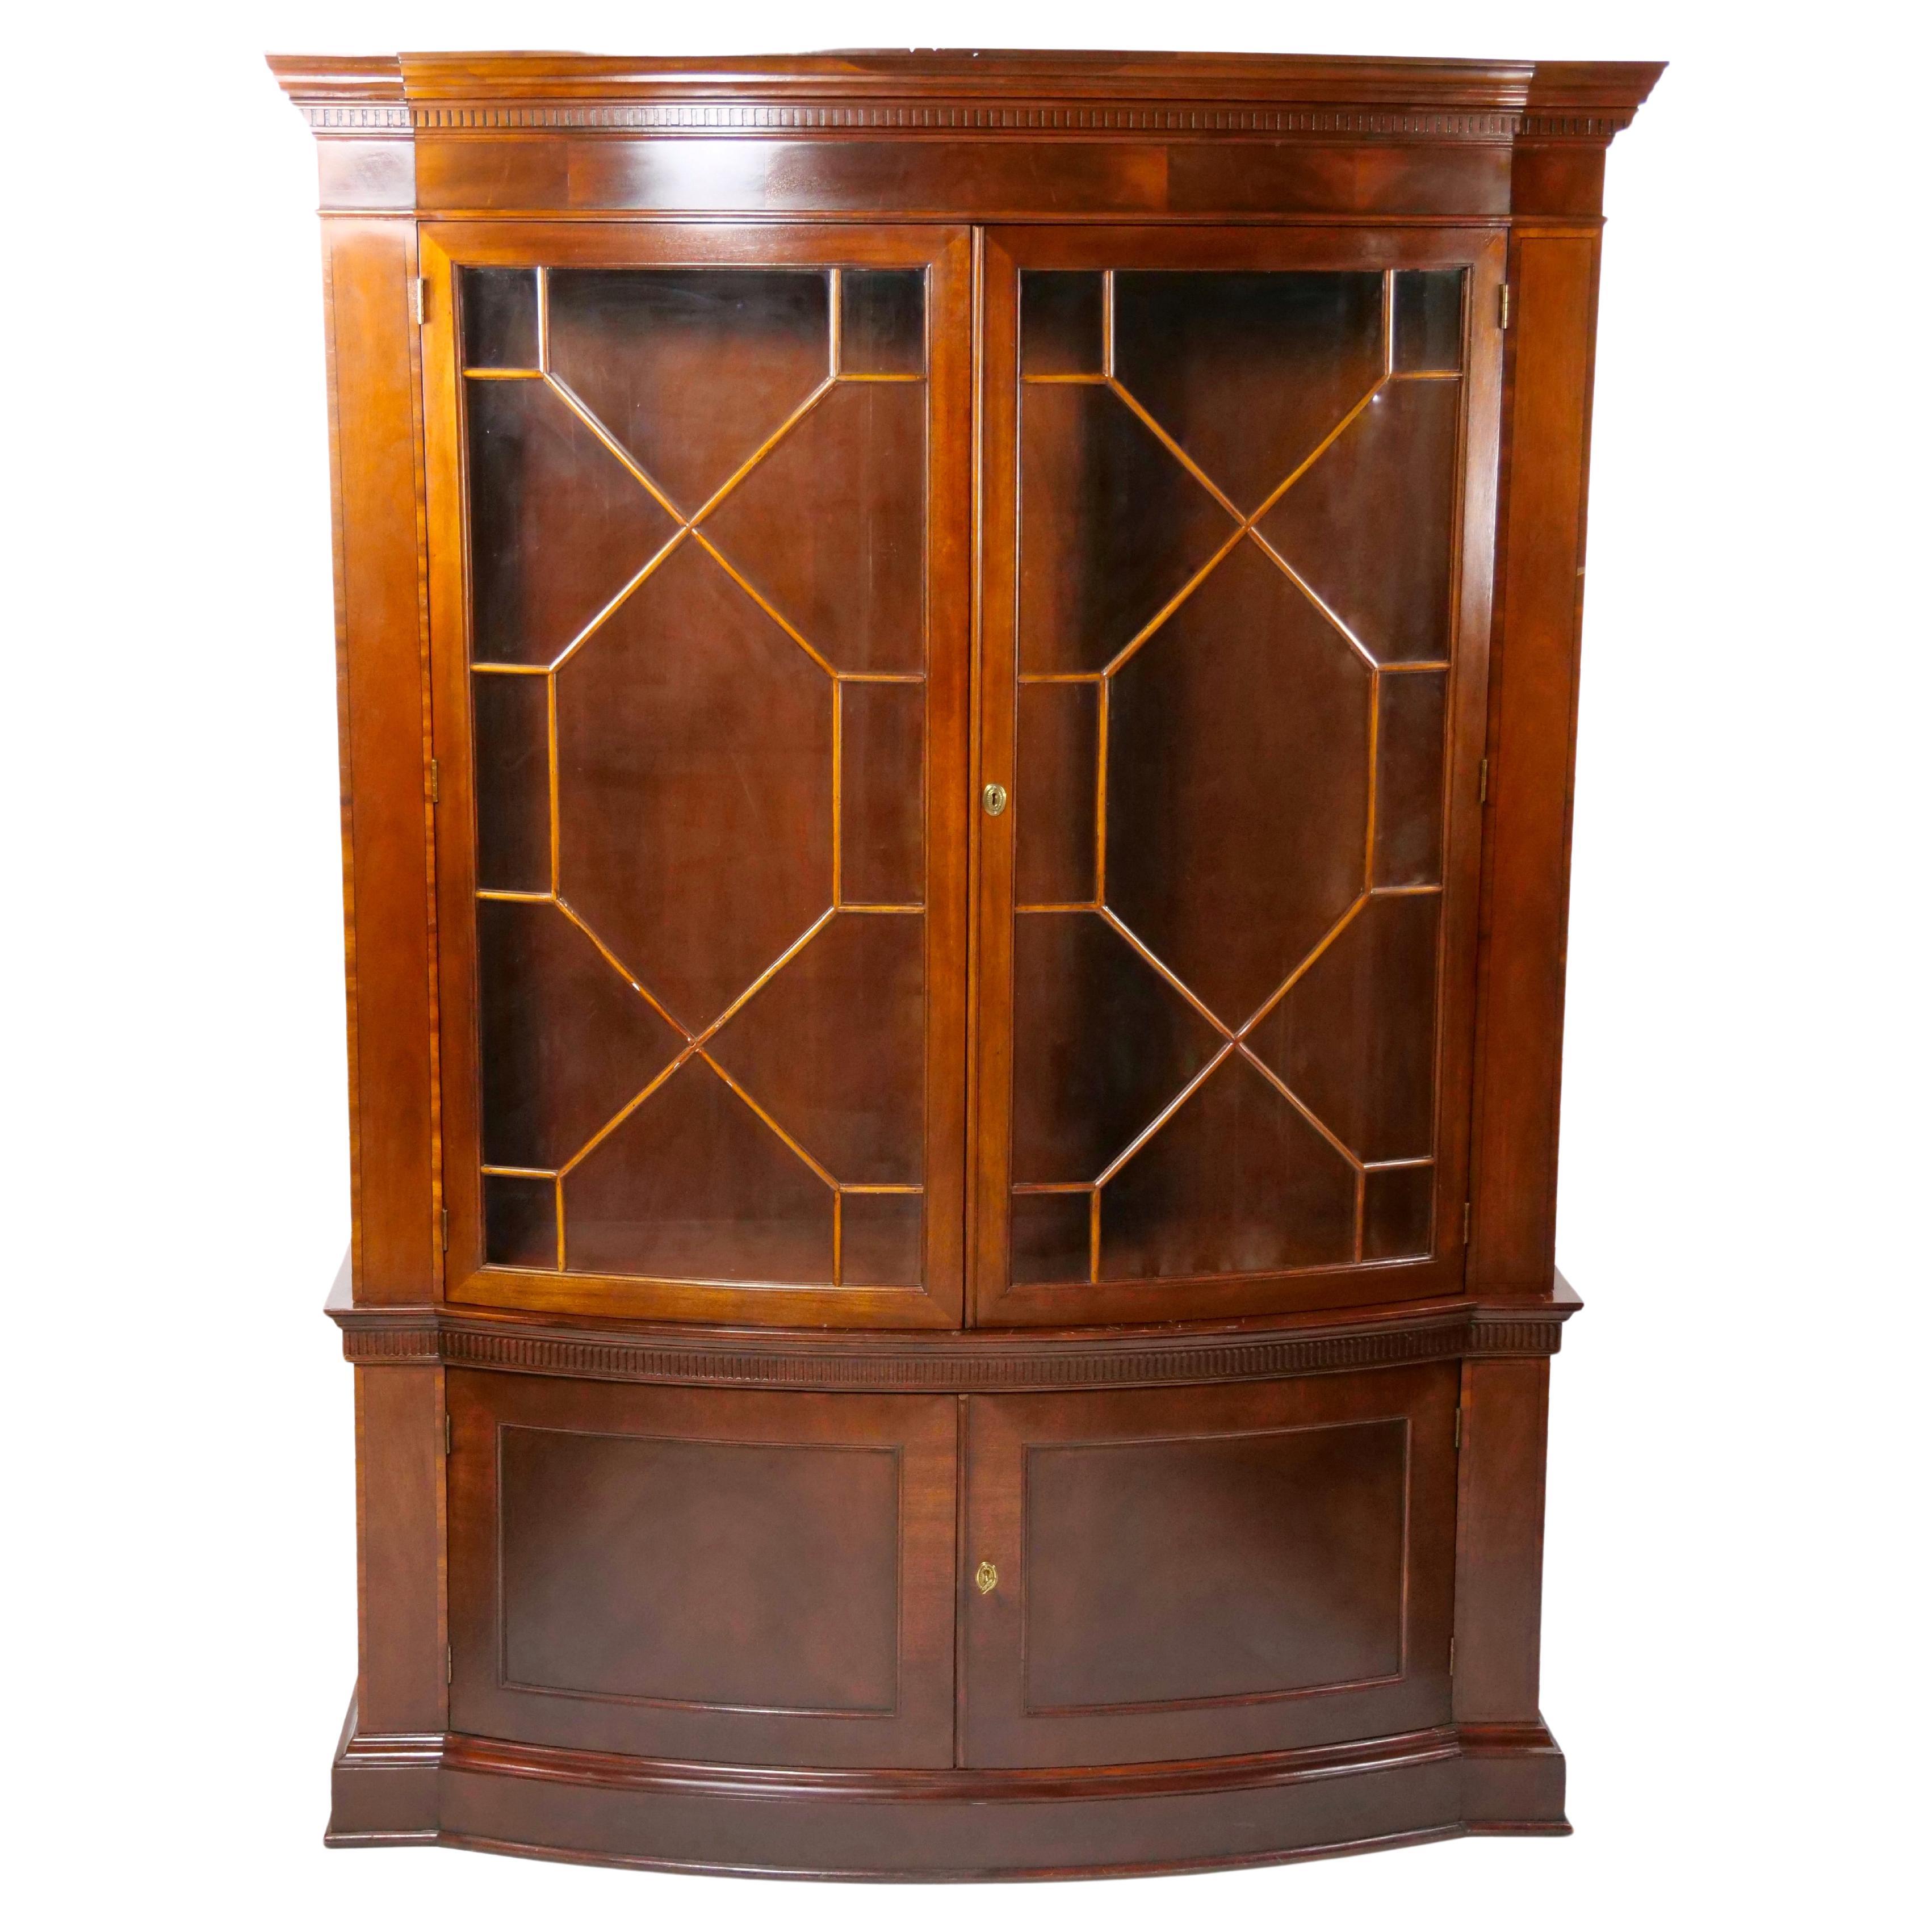 Early 20th Century  Mahogany Wood Demilune Shape Historical Charleston Cabinet For Sale